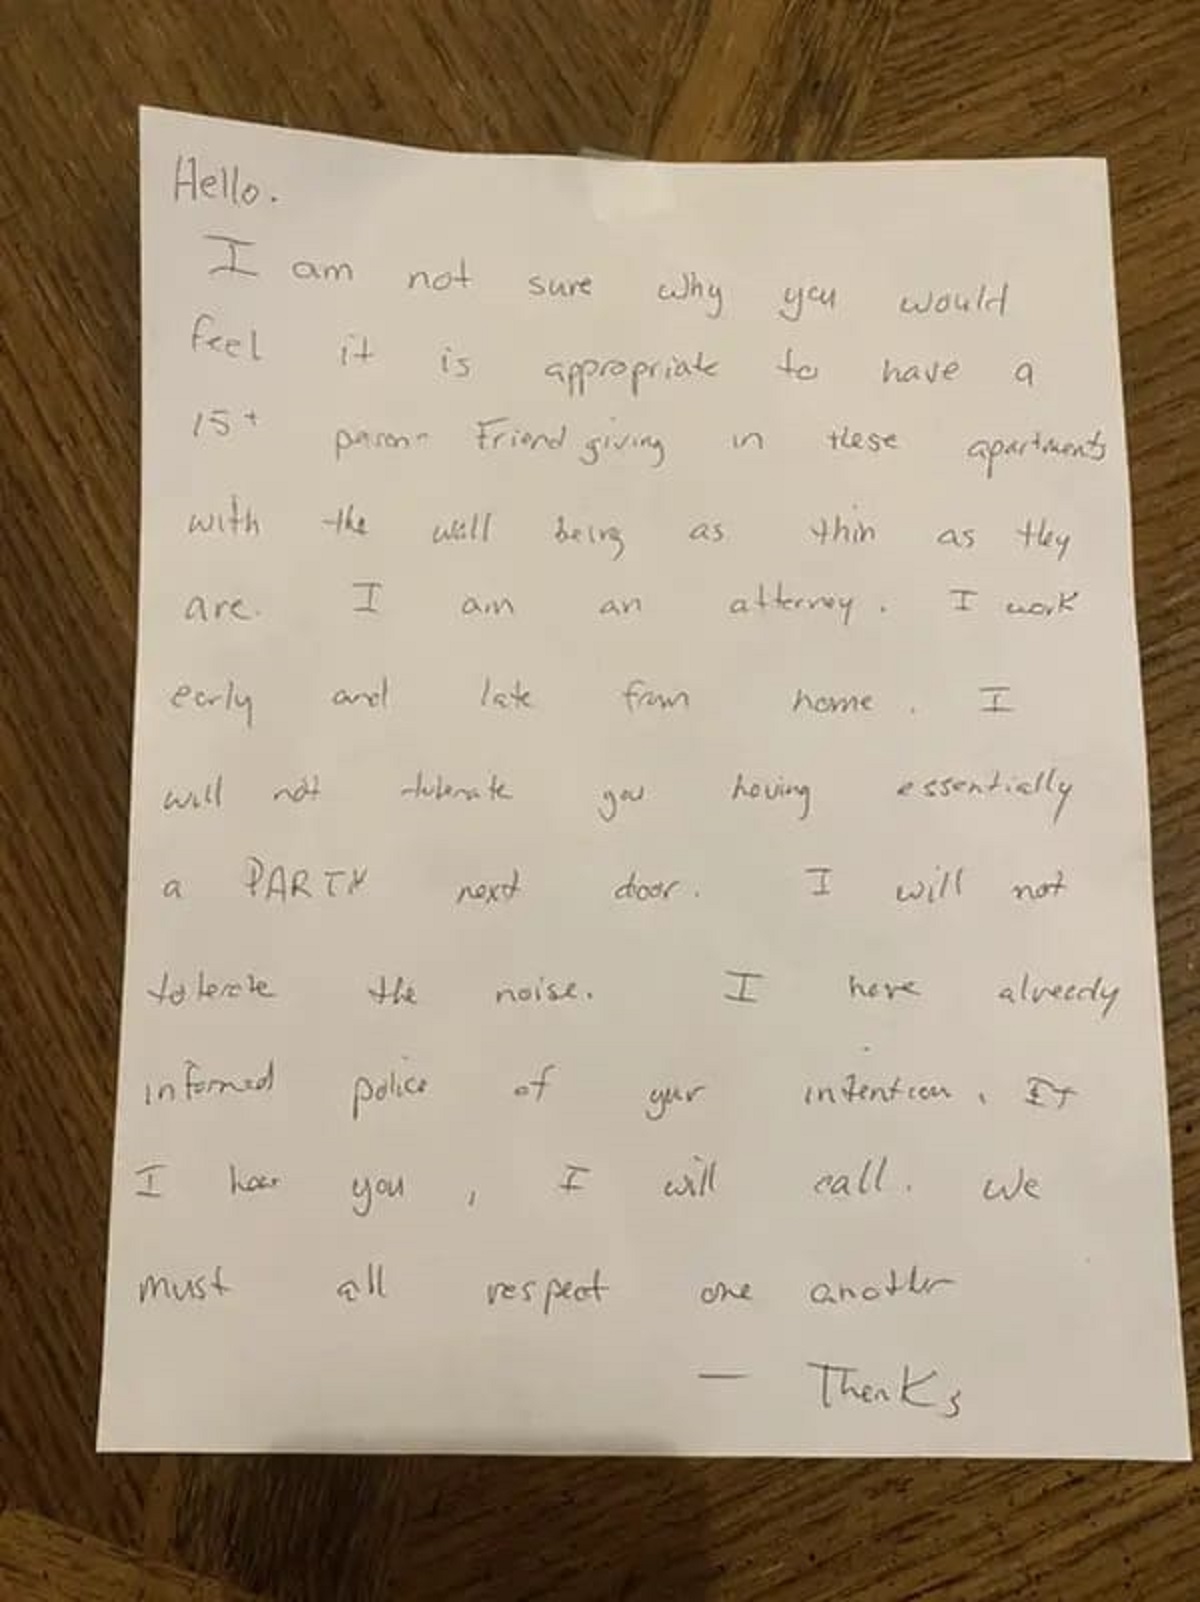 “Went to a Friendsgiving, they let their neighbor know ahead of time that they would be having people over, it was 4:45 pm on a Saturday and about 6 people were there at that point. He abruptly knocked on the door once, taped this note to the door, and ran off.”